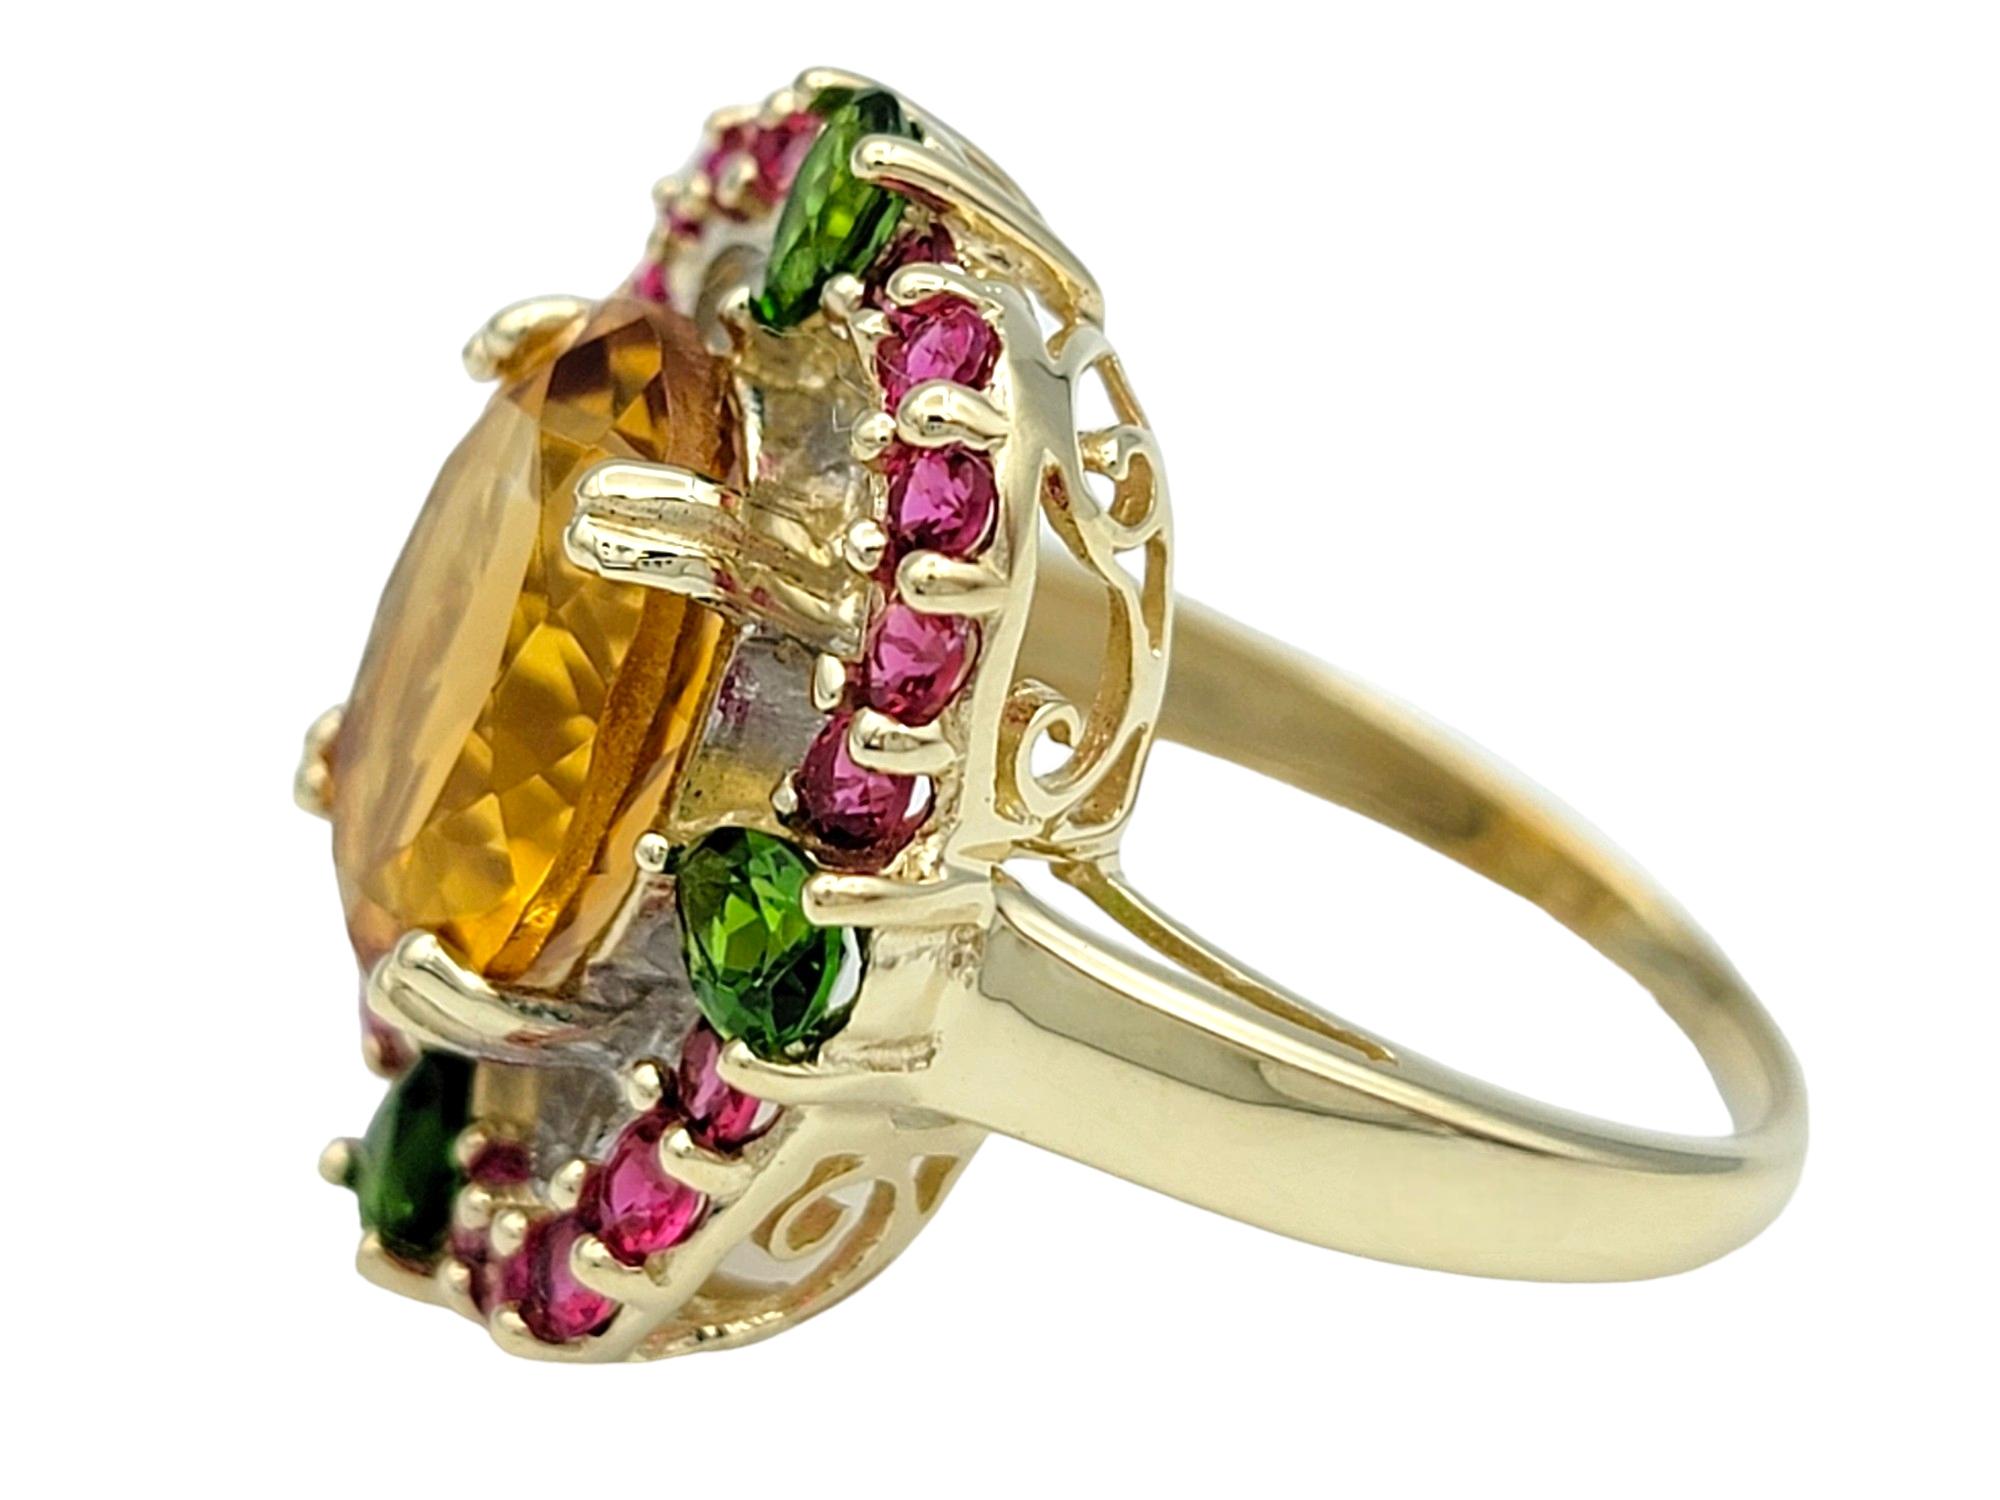 Oval Cut Oval Citrine Cocktail Ring with Rubies and Peridots in 14 Karat Yellow Gold For Sale